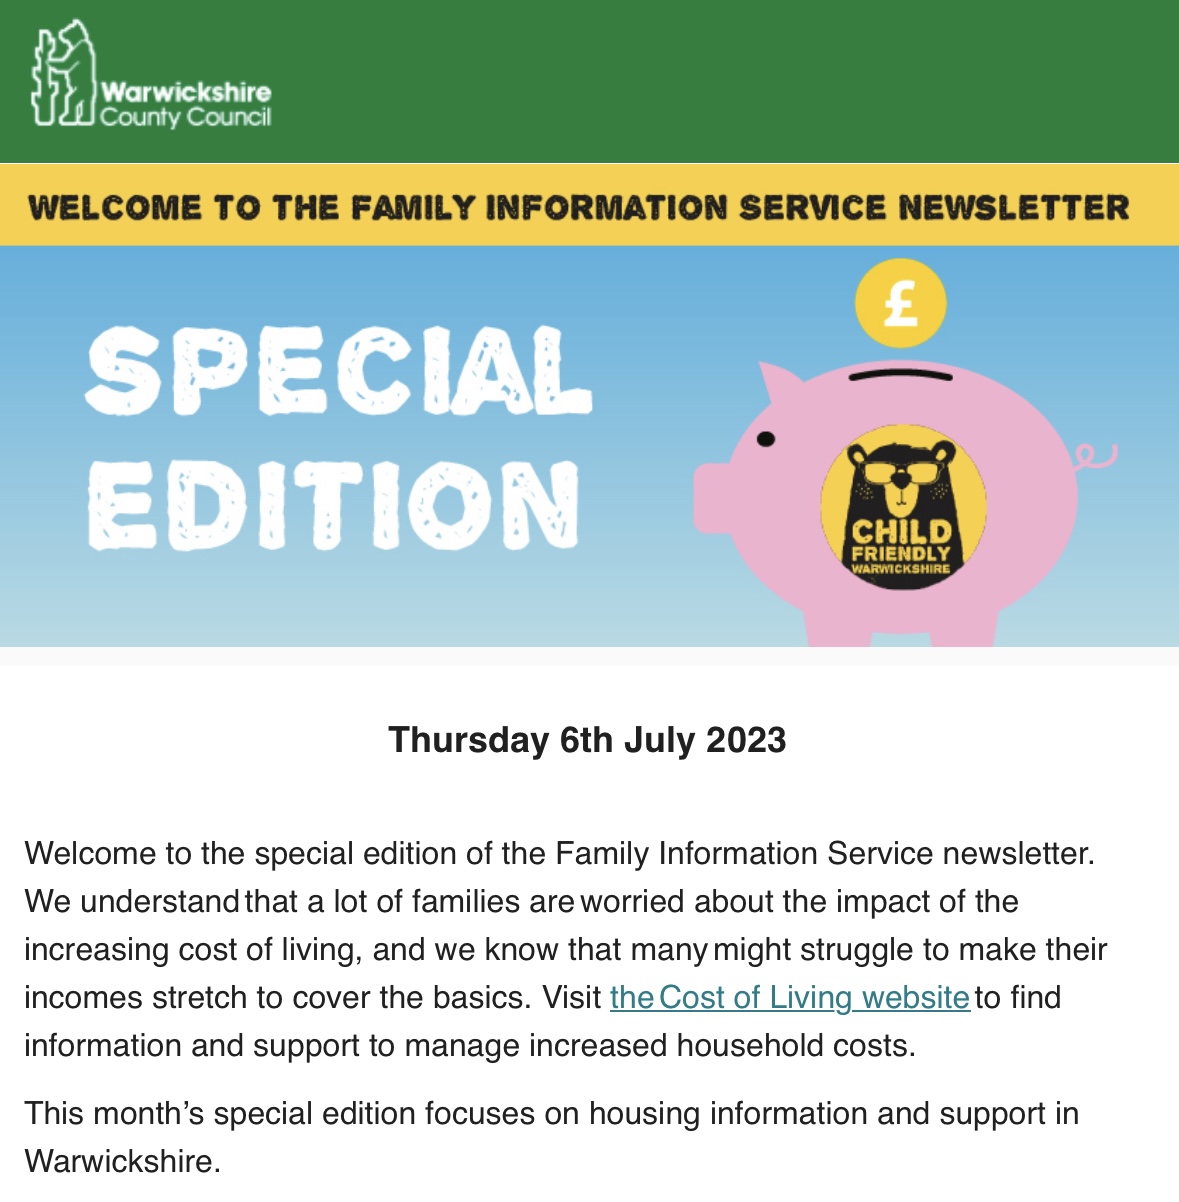 Family Information Service (FIS) Newsletter - Housing Information and Support Special Edition